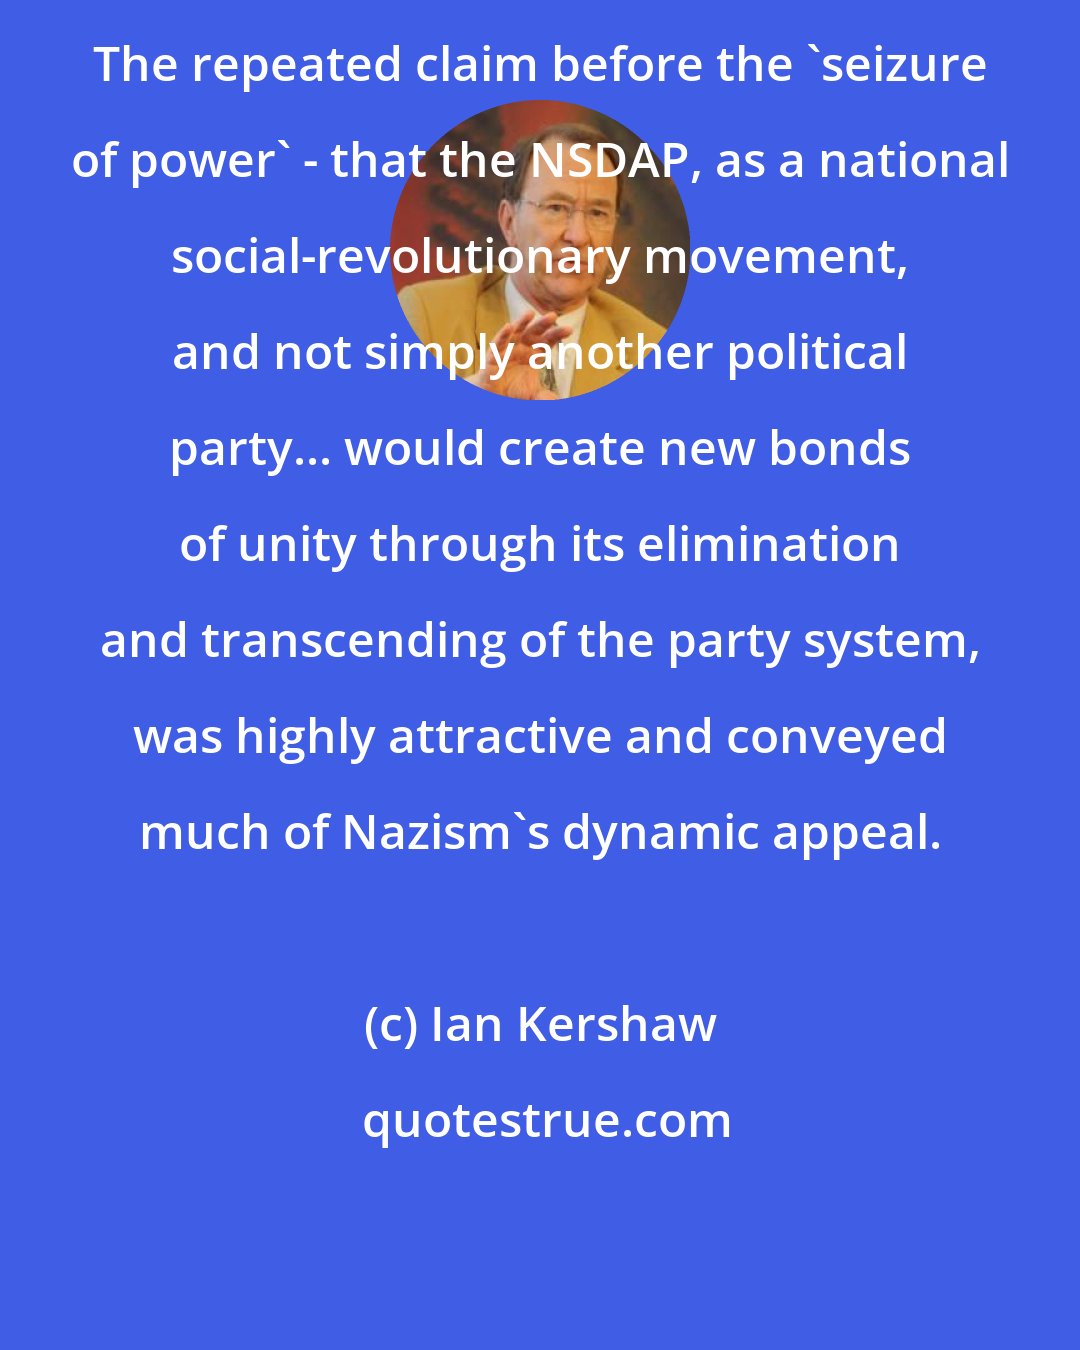 Ian Kershaw: The repeated claim before the 'seizure of power' - that the NSDAP, as a national social-revolutionary movement, and not simply another political party... would create new bonds of unity through its elimination and transcending of the party system, was highly attractive and conveyed much of Nazism's dynamic appeal.